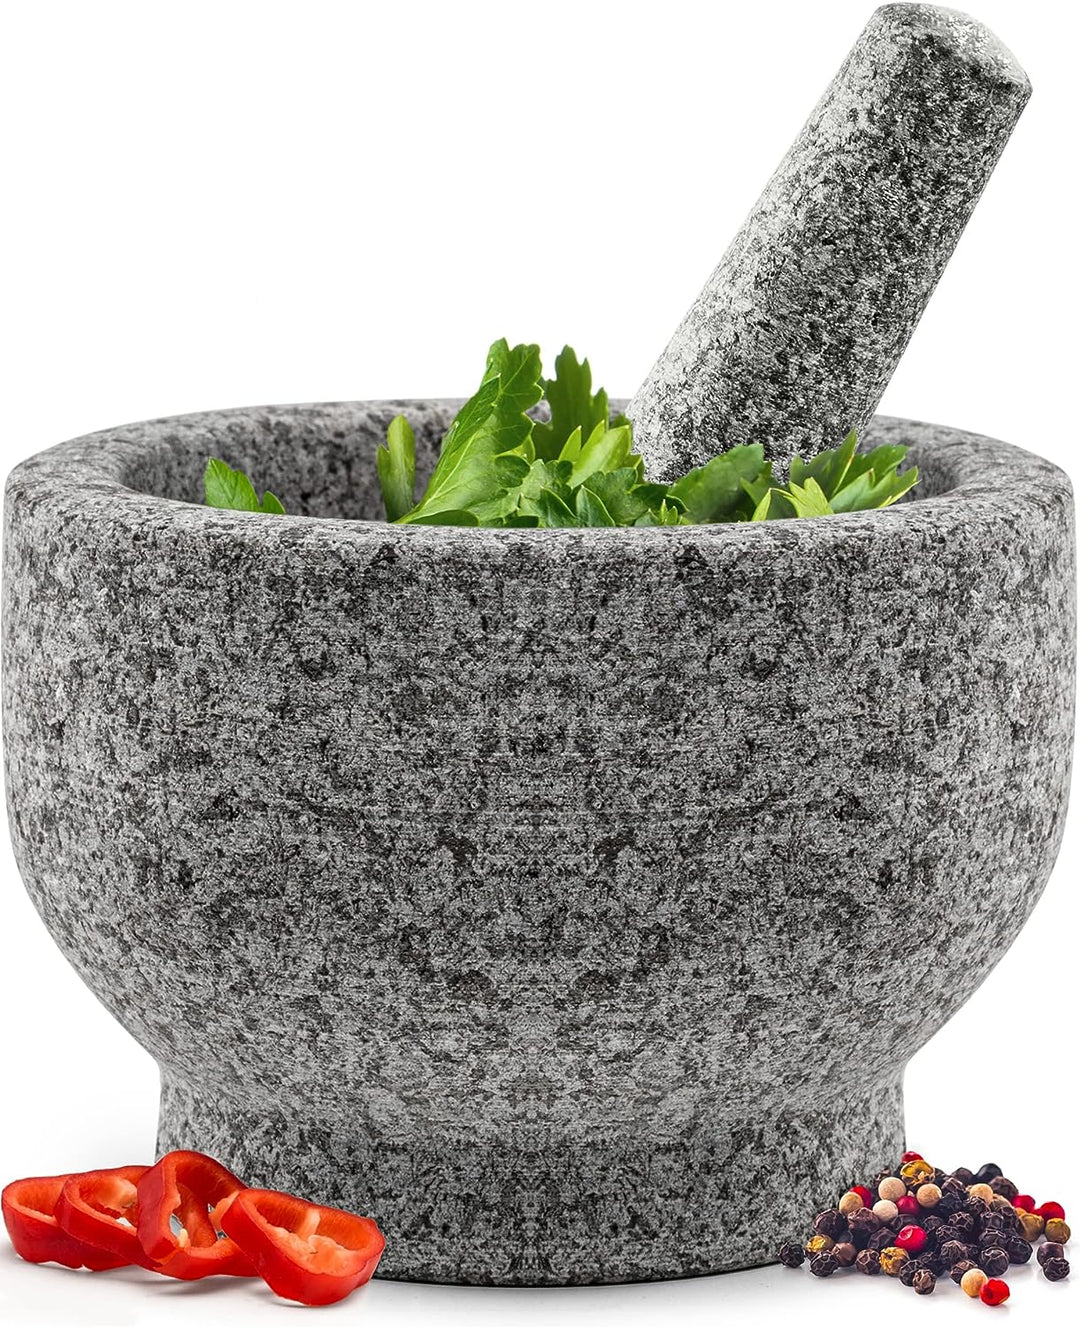 Large Mortar and Pestle Set, 2 Cup Capacity, Heavy Granite Stone